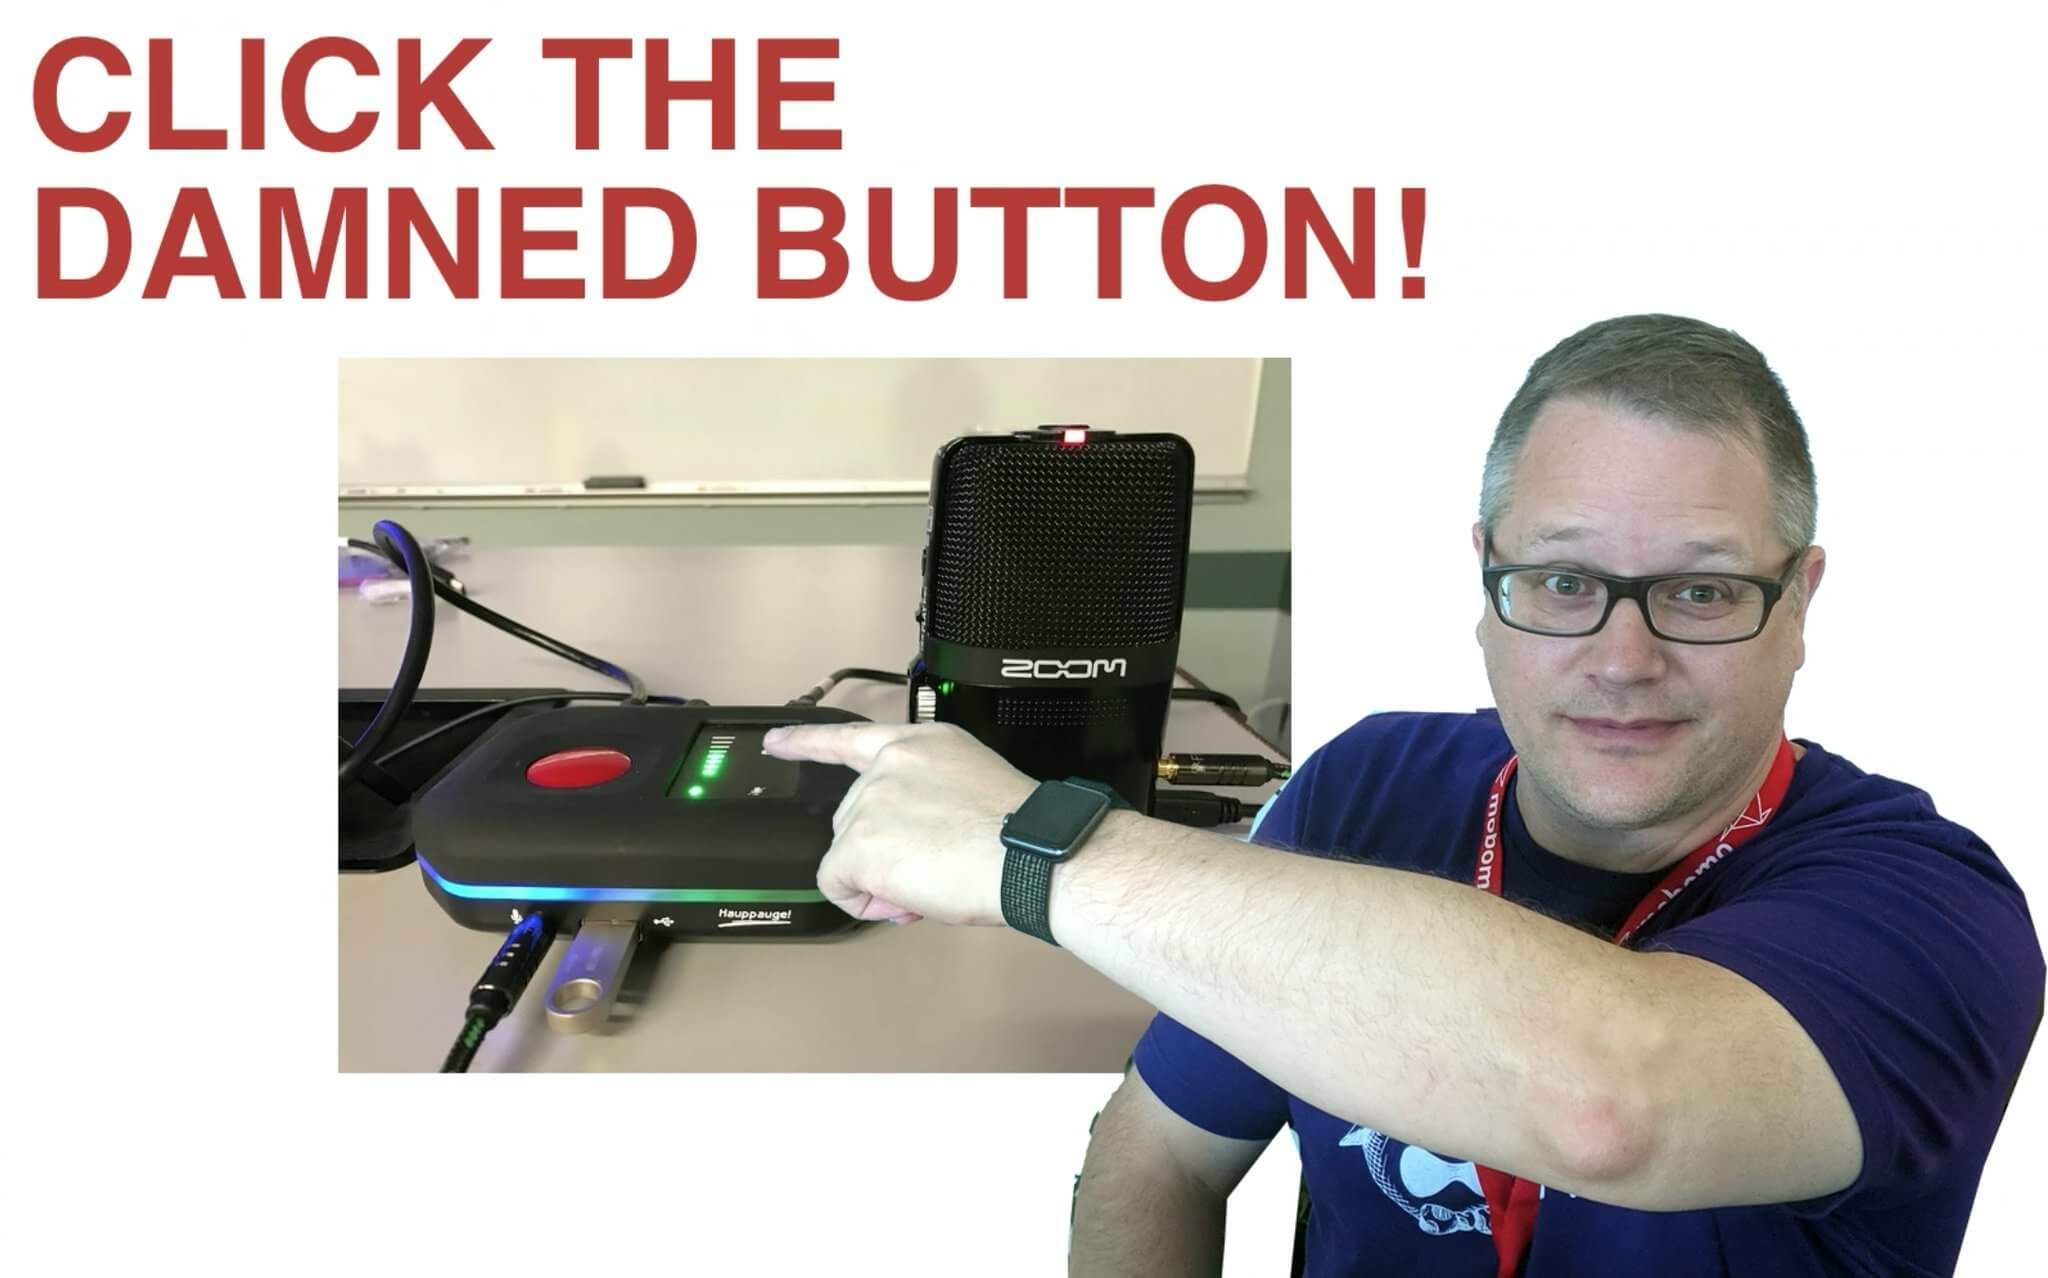 Kevin Thull telling you to push the damn button!